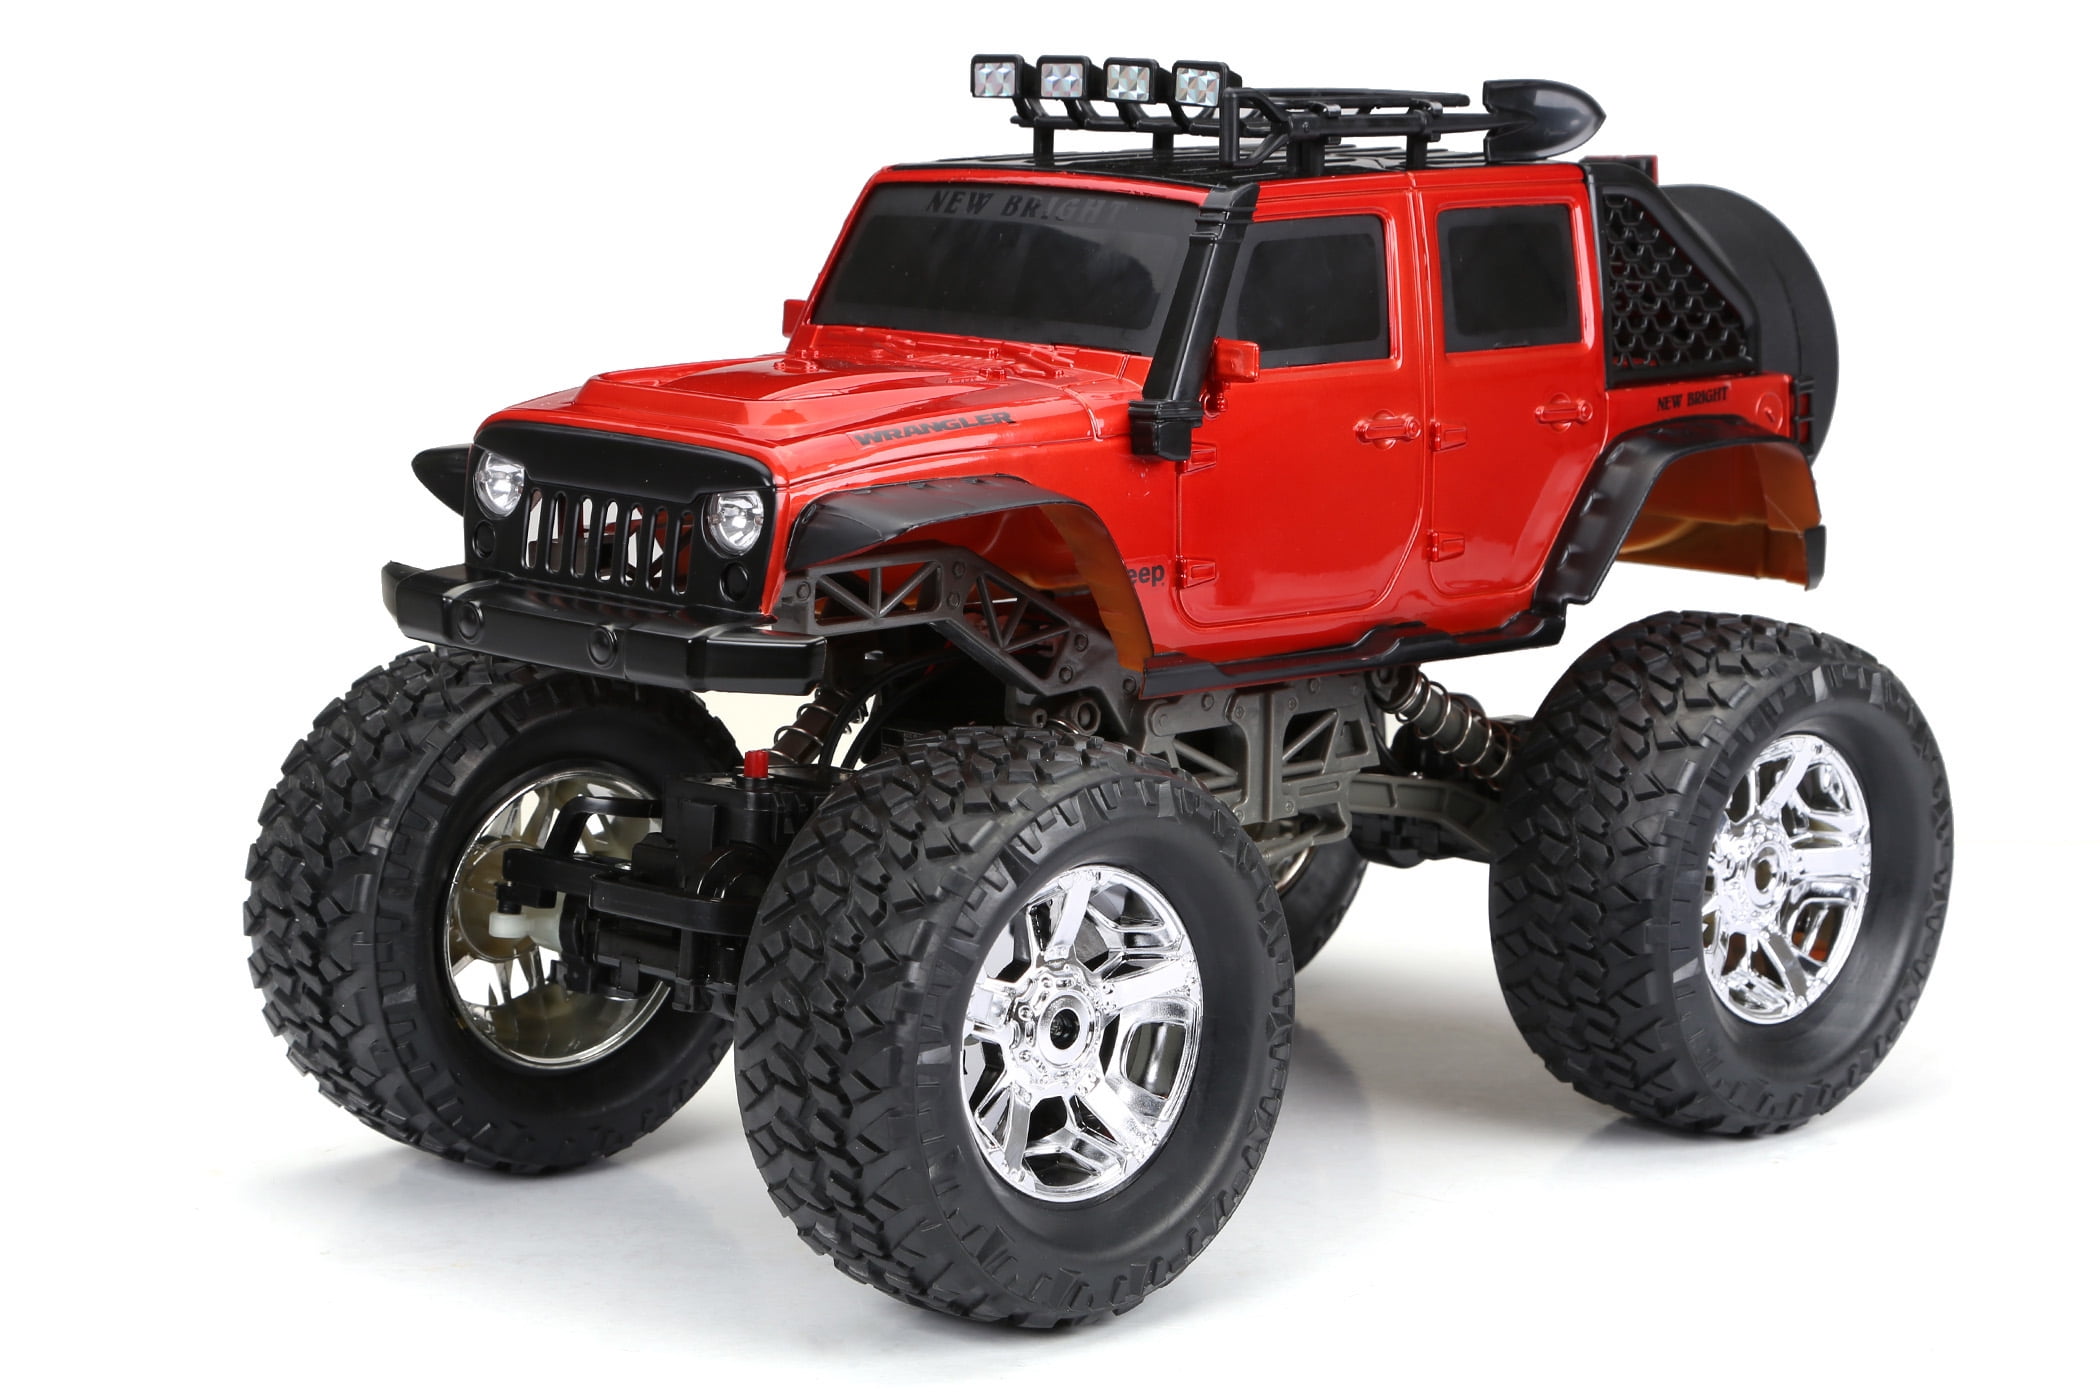 Jeep full radio control Off Road Safari Red Car lights by Blue Hat New in box 